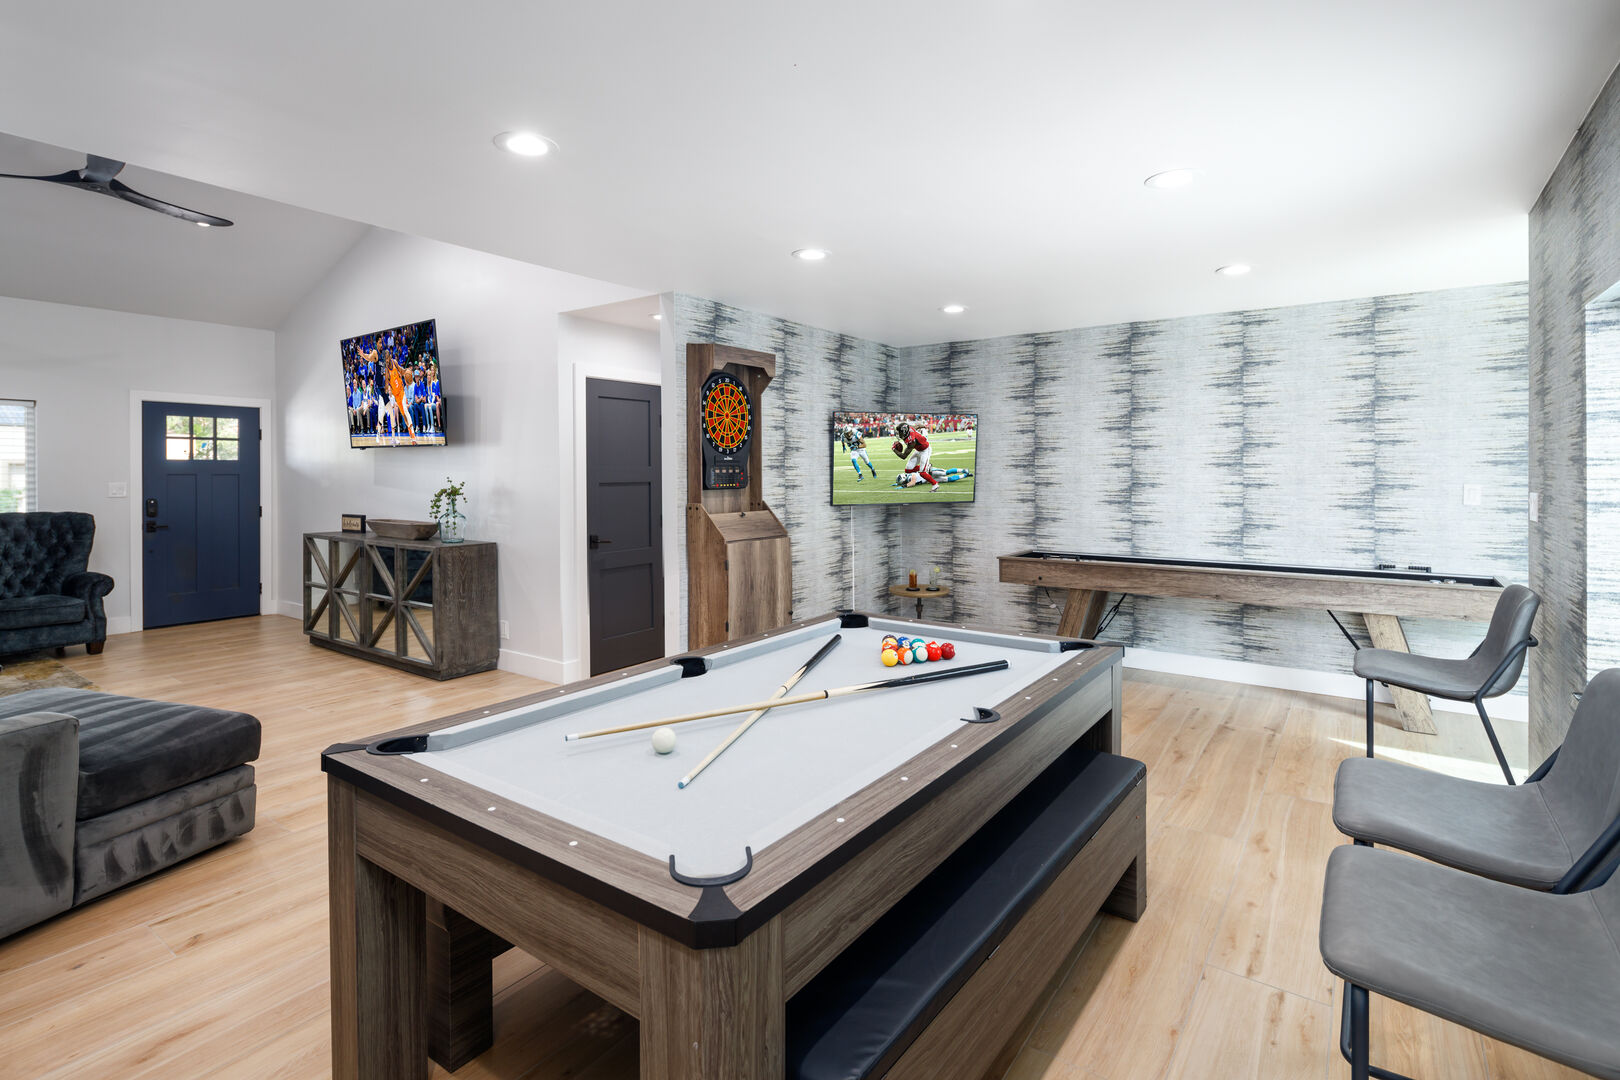 Formal dining area converts to game room! Table can be changed to pool table or ping-pong! Also features shuffle board, smart TV, and dart board!